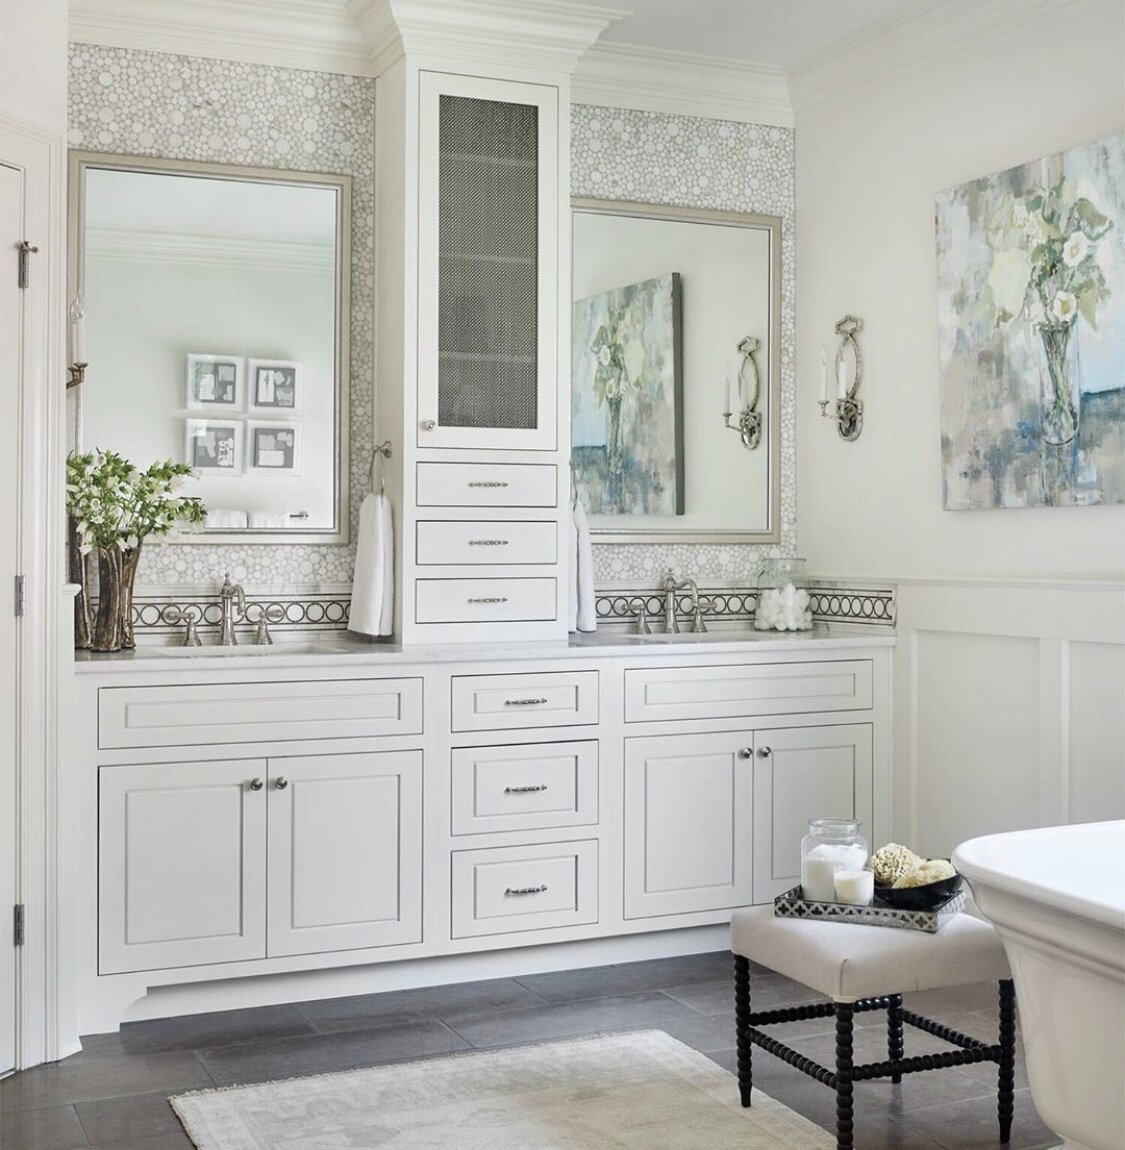 "Neutrals" framed in acrylic boxes are the perfect touch of clean in this master bath